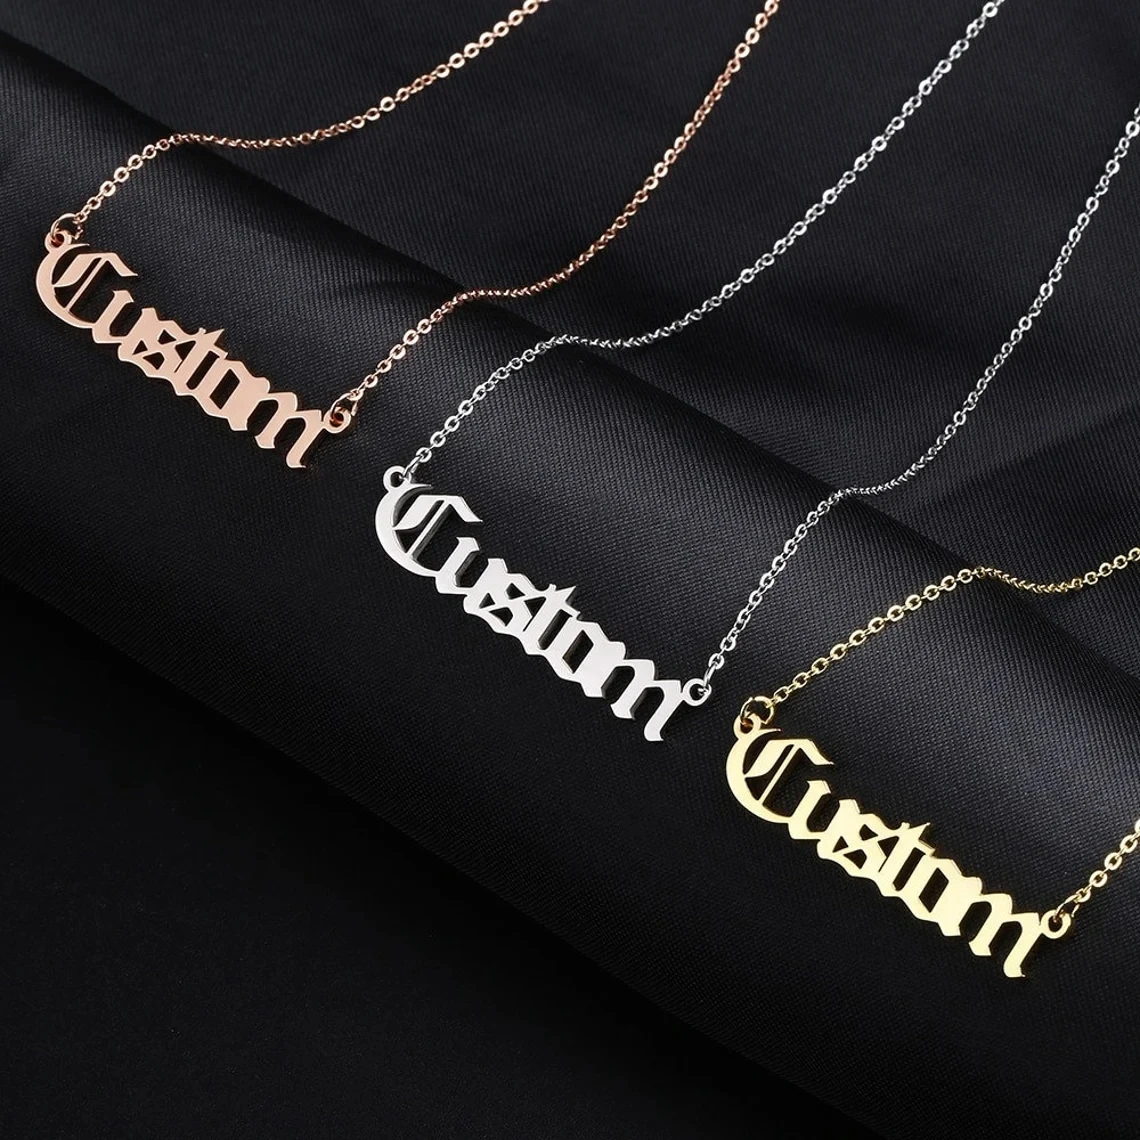 Customized Necklace Old English Font Engraved Nameplate Pendant Personalized Custom 14K Gold Plated Name Necklace Goth Styles